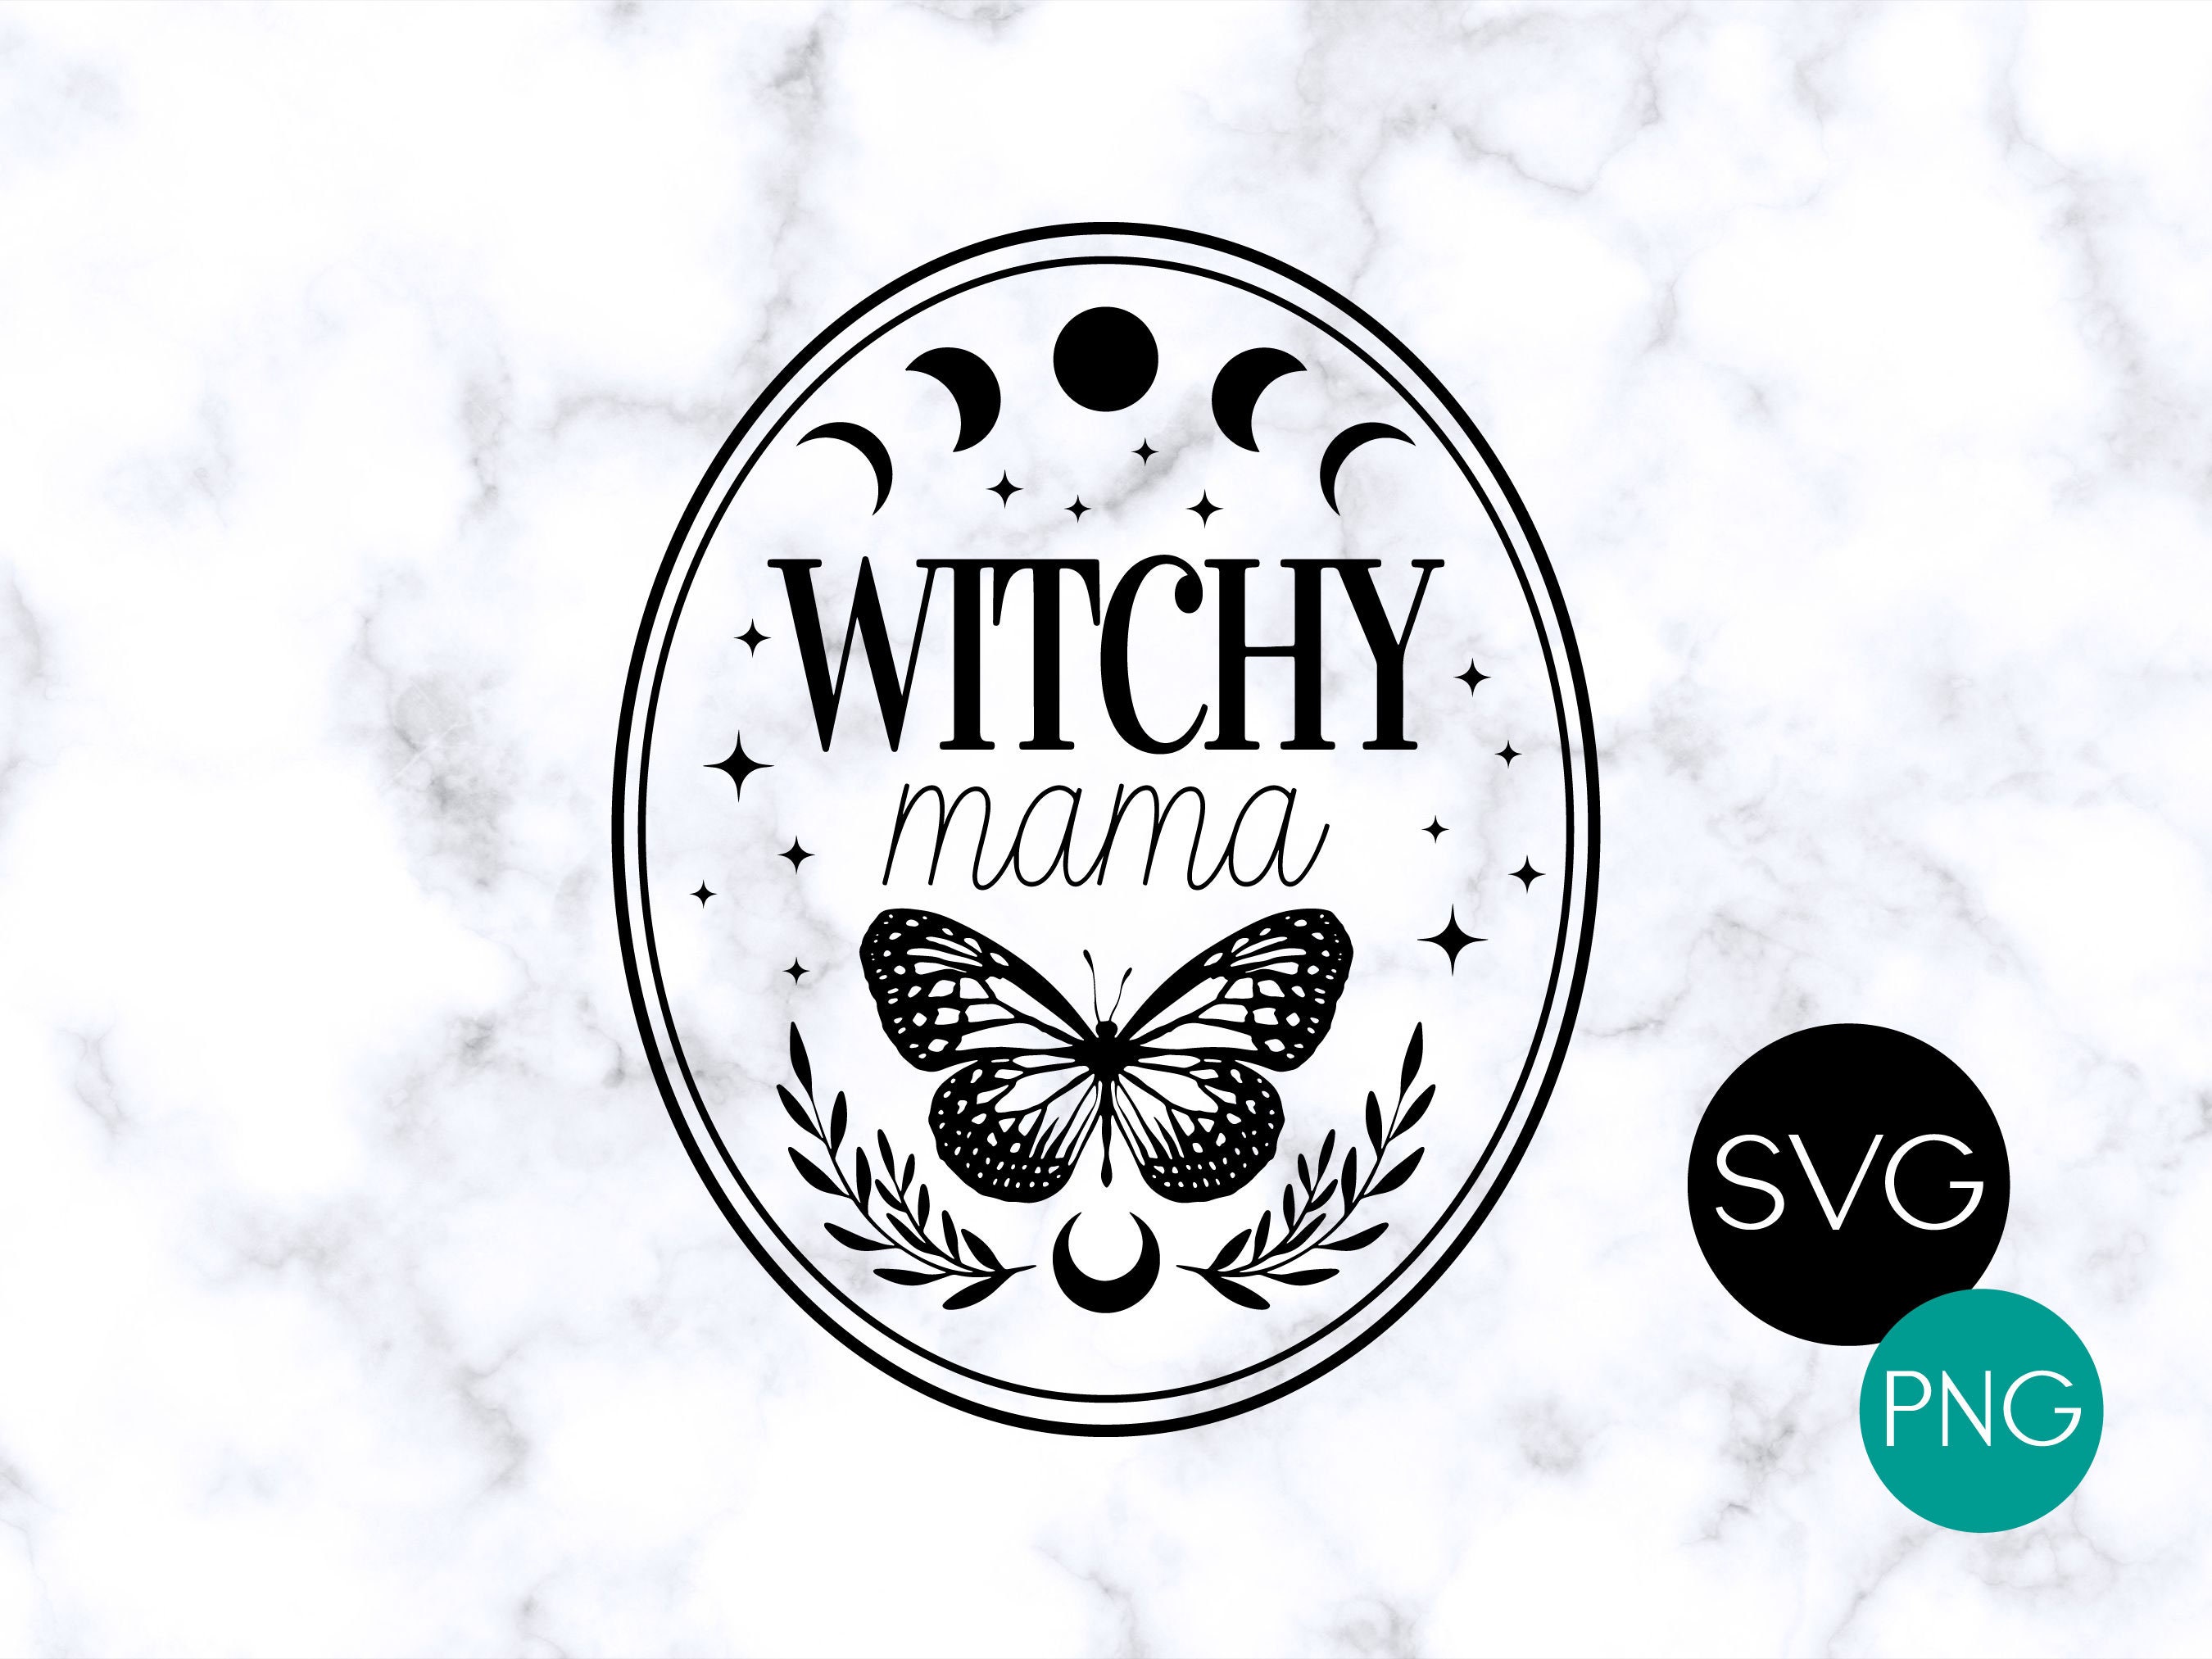 Witchy Stickers SVG Cut file by Creative Fabrica Crafts · Creative Fabrica